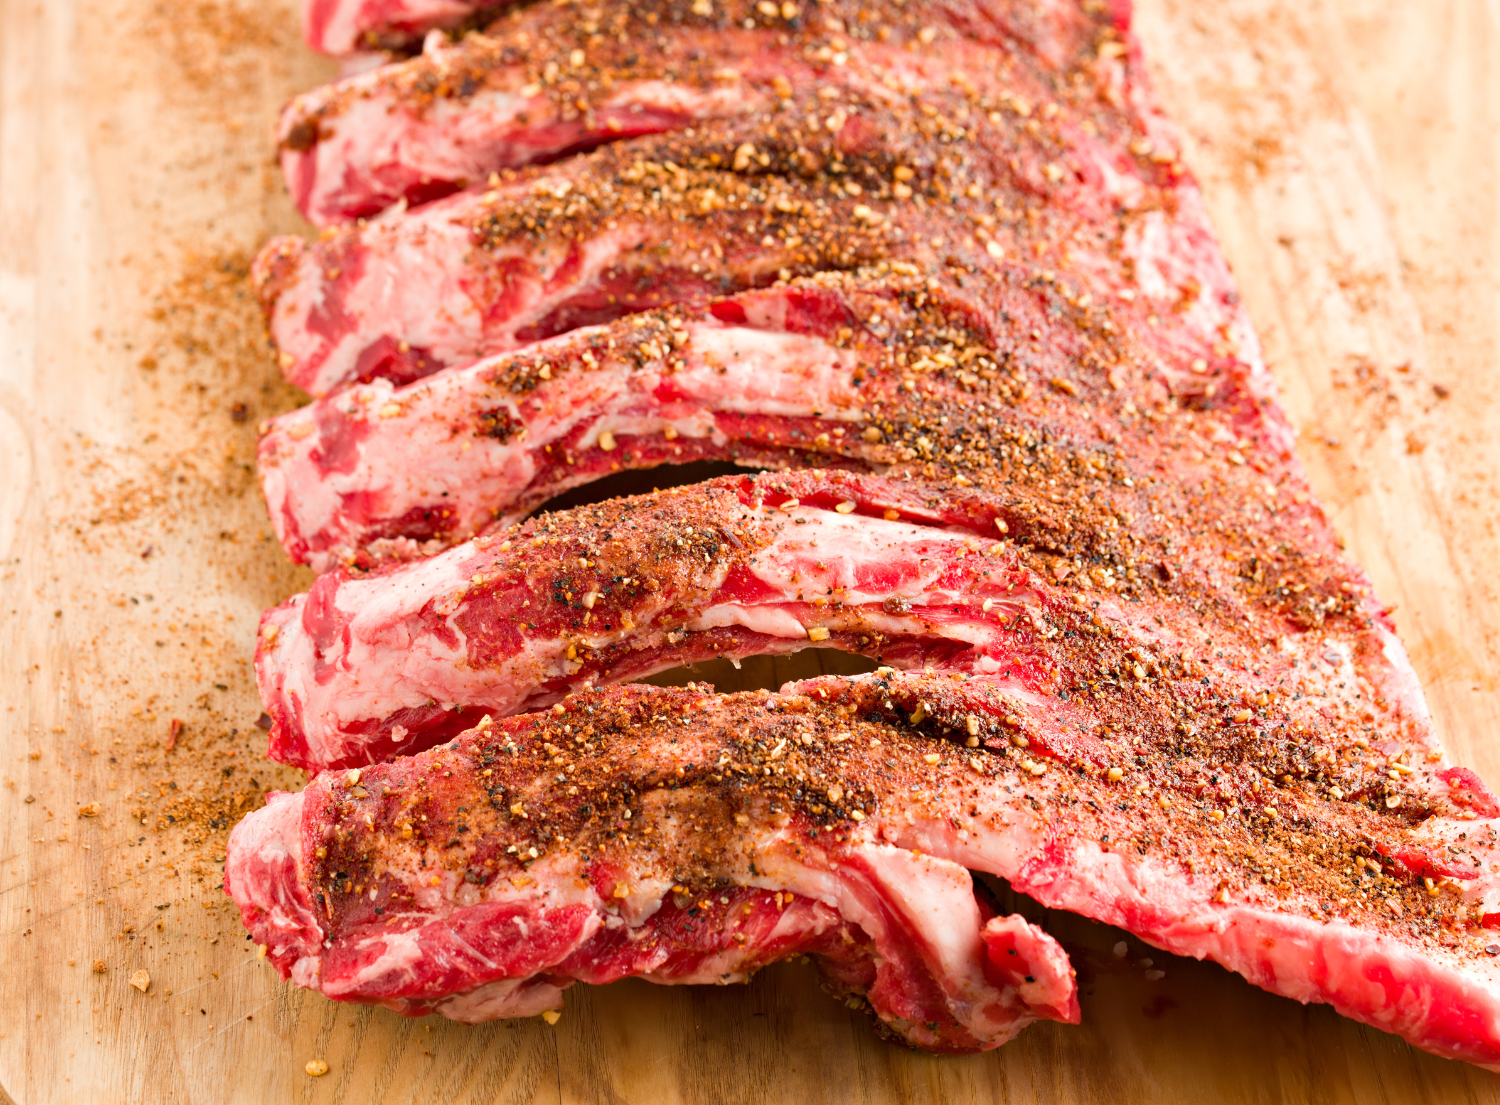 Uncooked rack of ribs with dry rub dusted on top before they are grilled